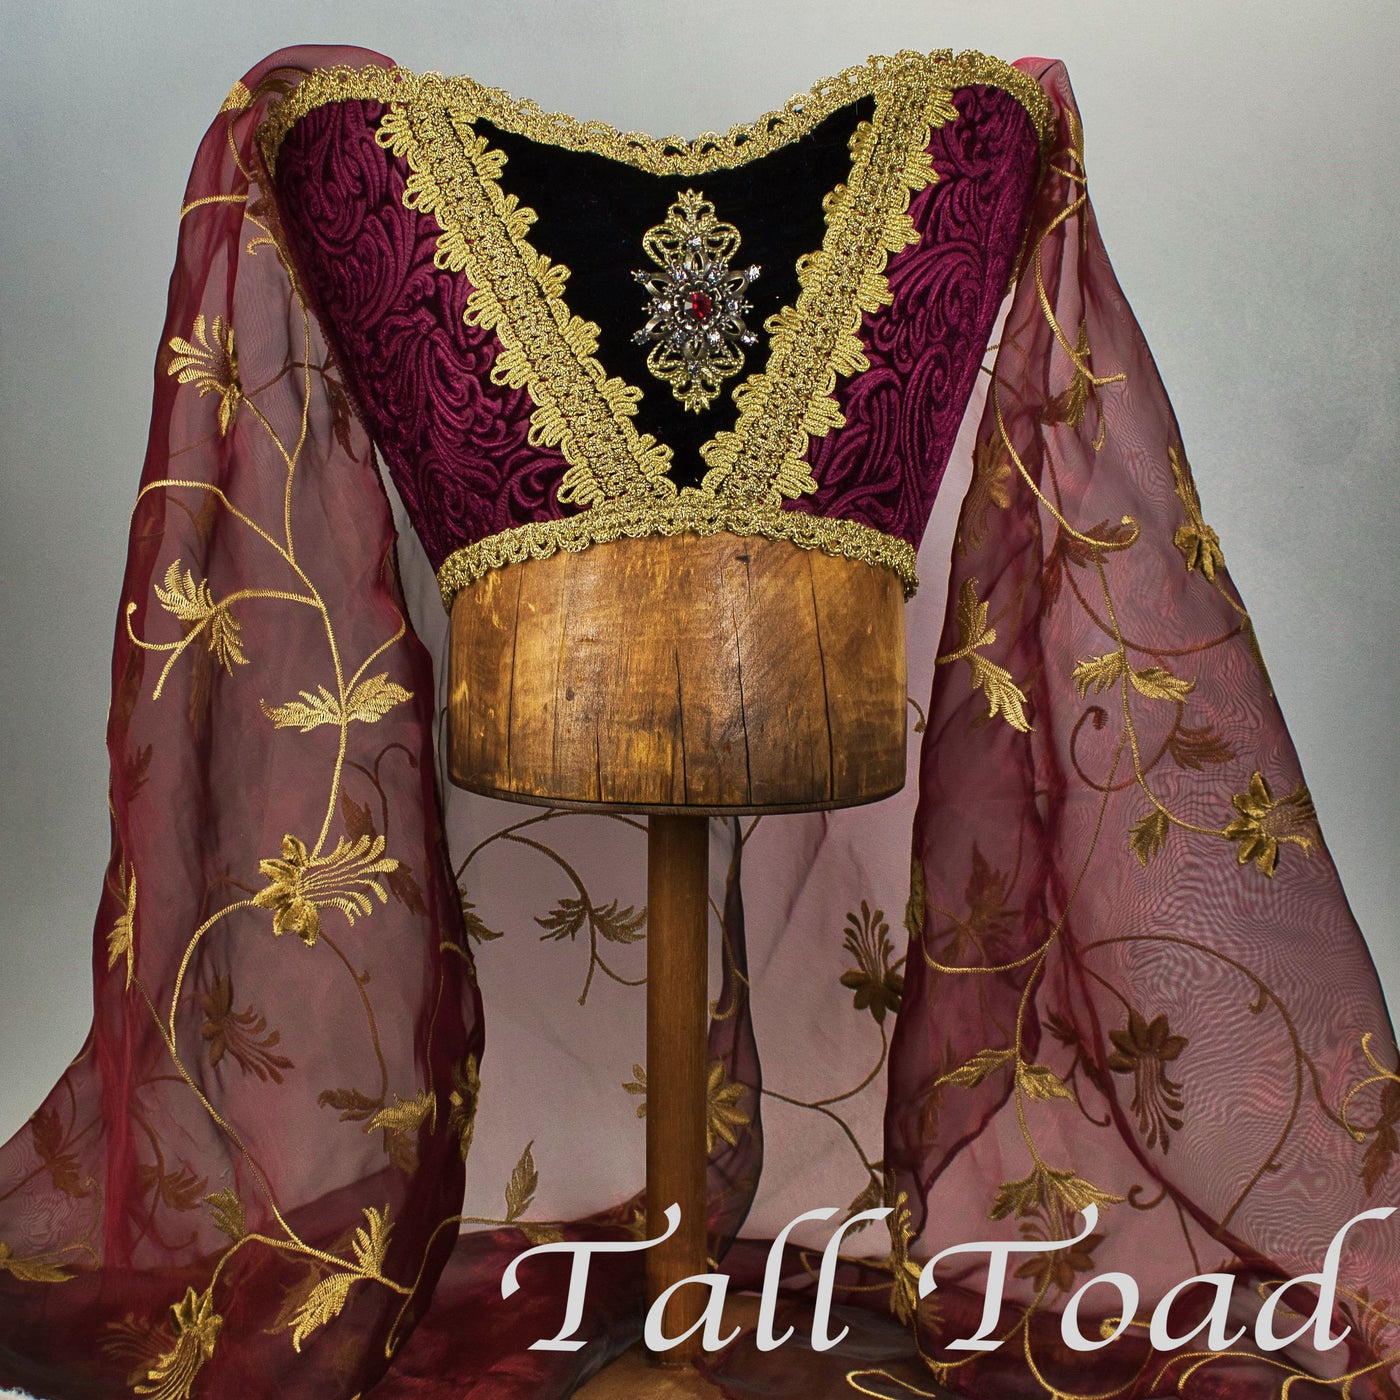 Fancy Horned Headdress - Wine / Wine Embroidered Veil / Ruby Jewel - Tall Toad